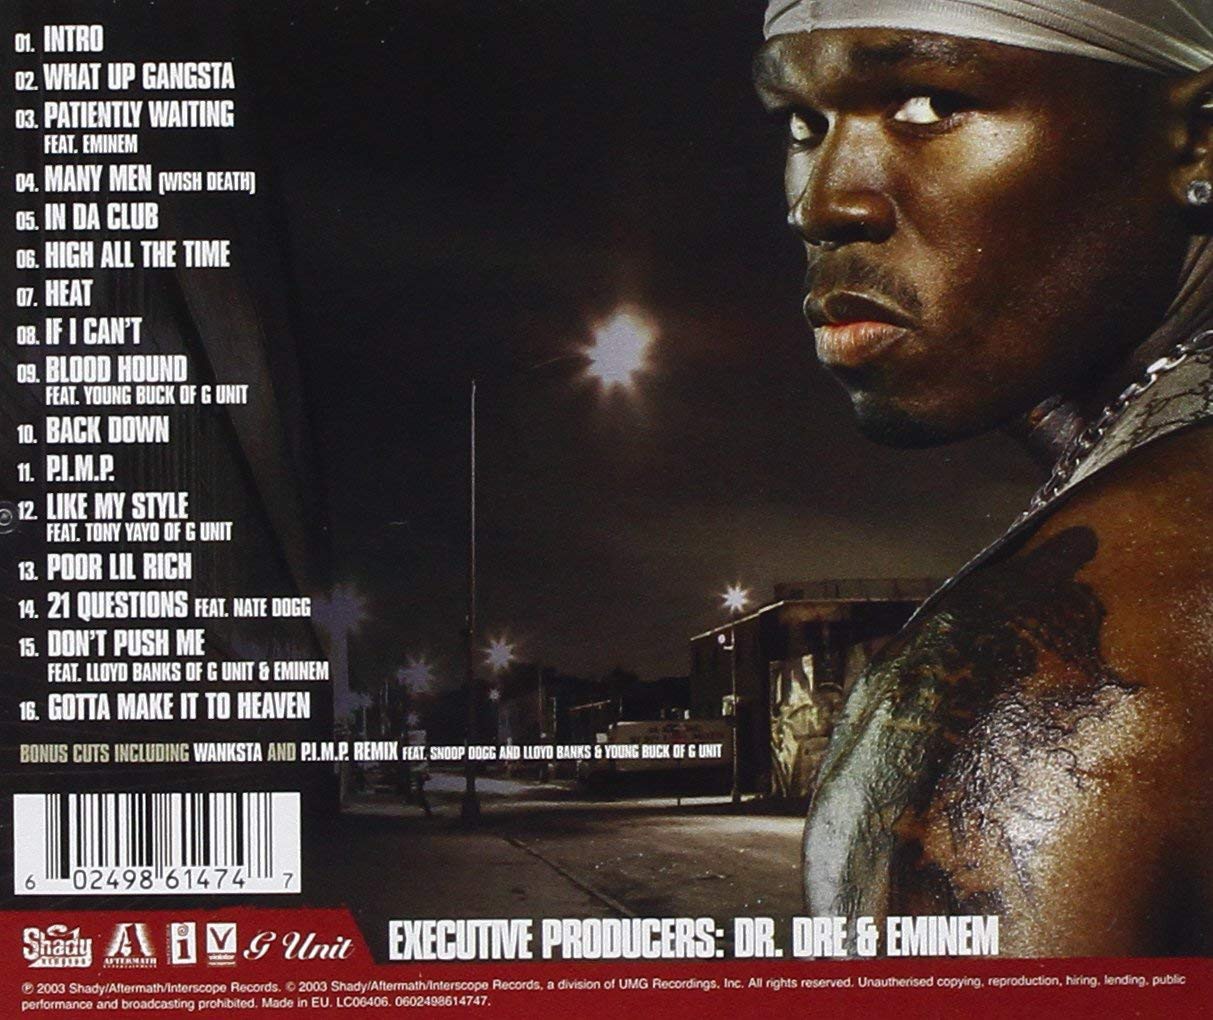 50 cent get rich or die tryin album cover